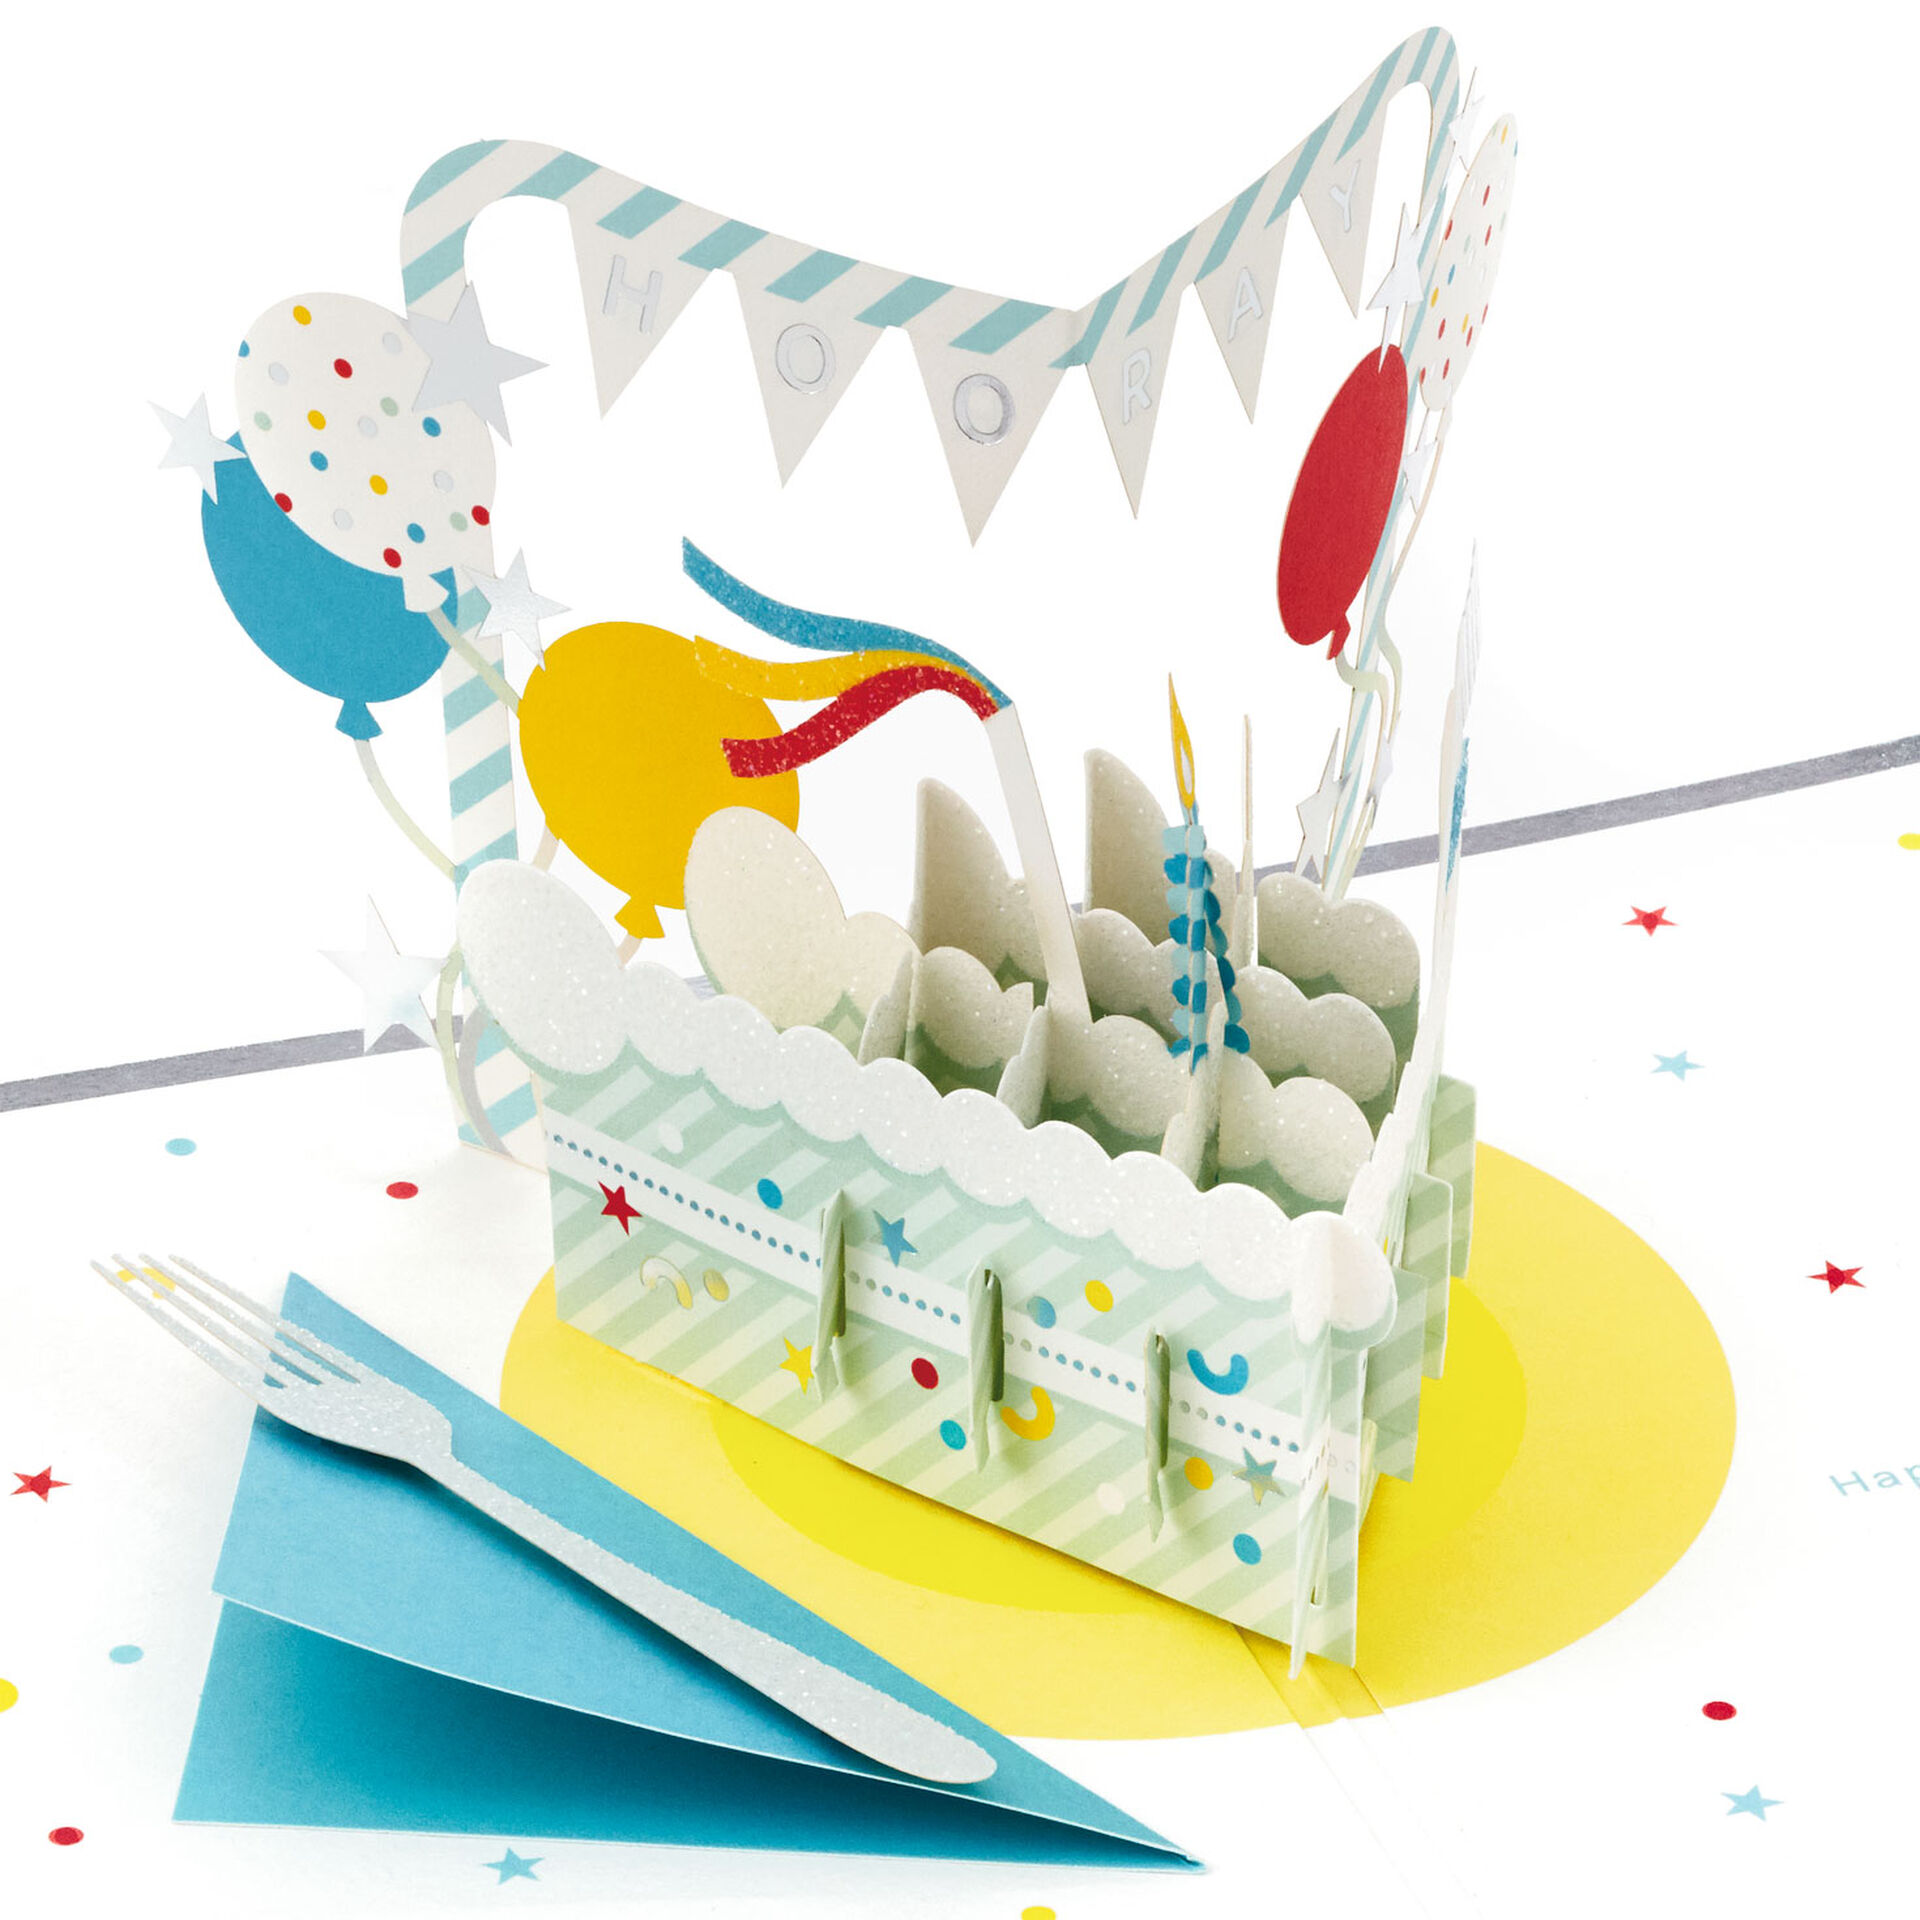 Hooray-Cake-and-Balloons-3D-PopUp-Birthday-Card_1299LAD2738_01